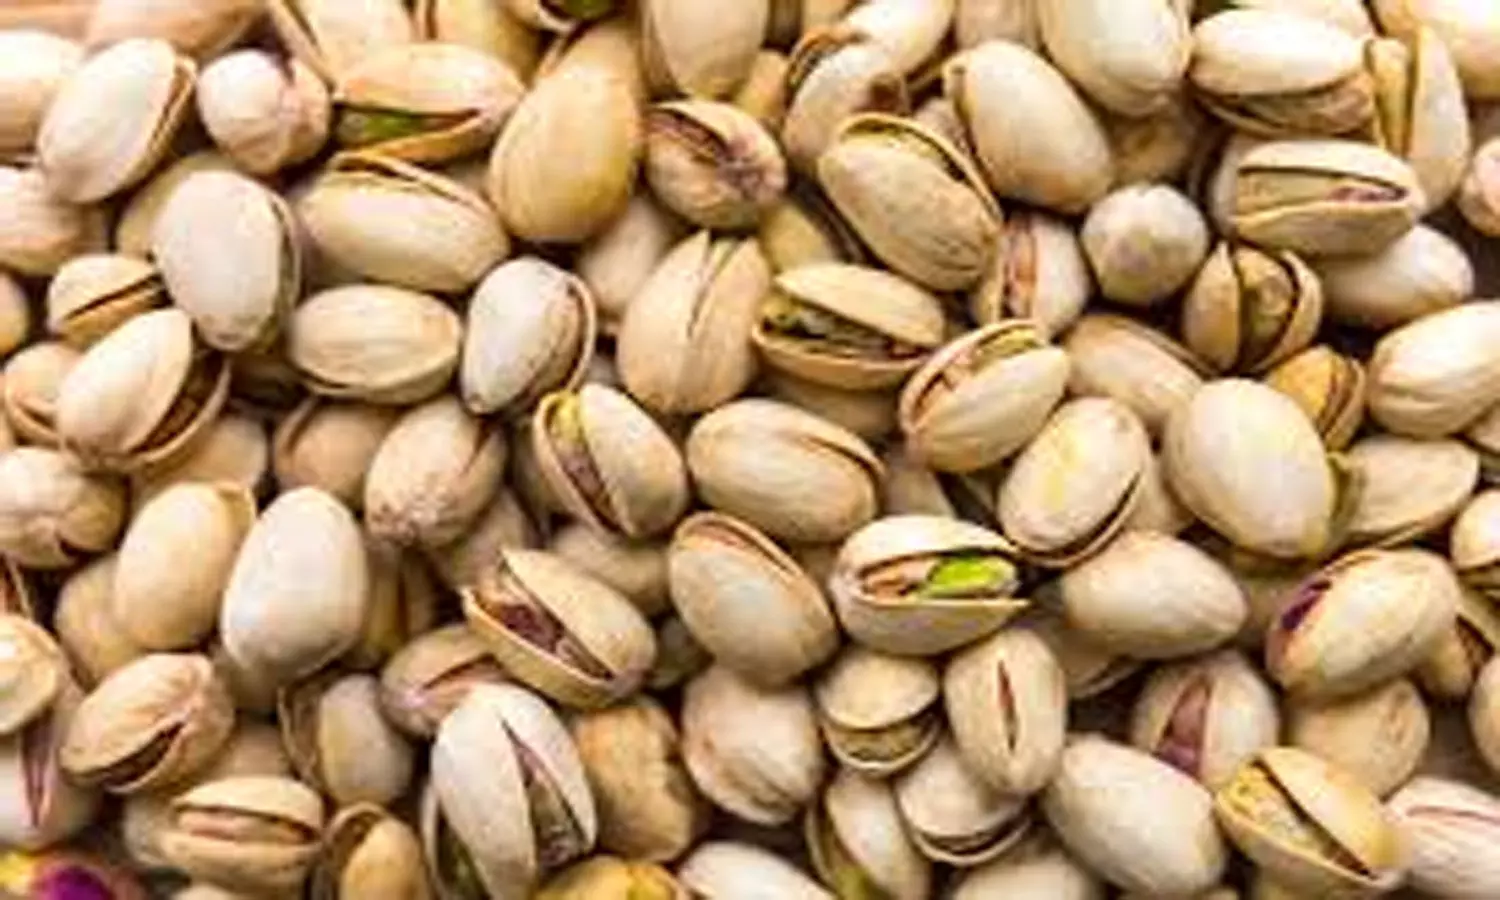 Pistachio consumption reduces blood sugar, systolic BP and increases HDL levels: Study